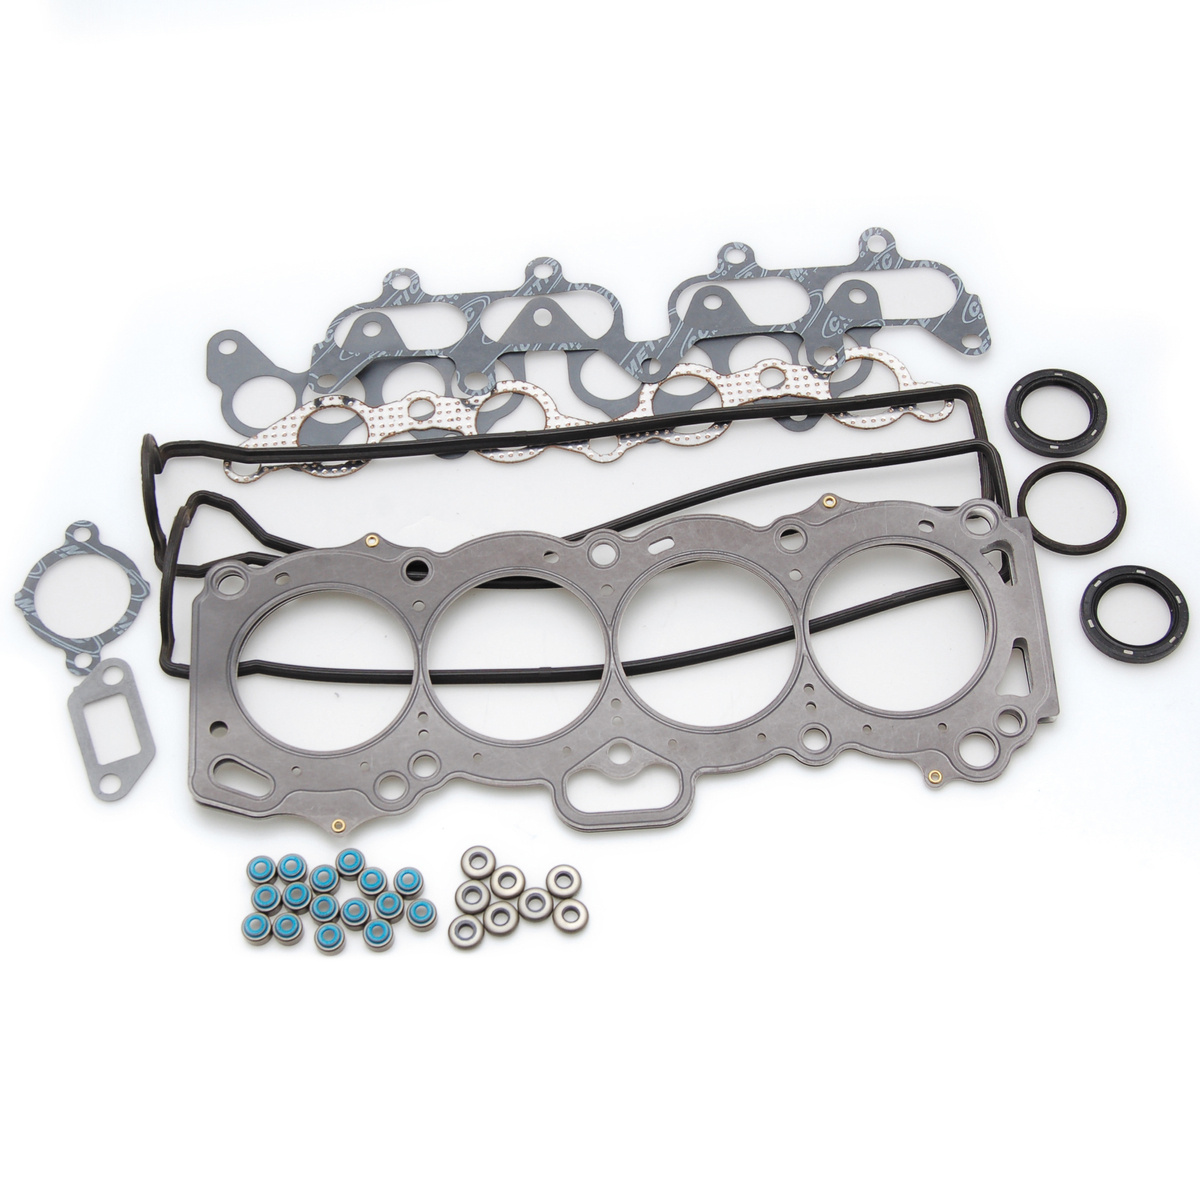 Cylinder Head Gasket Toyota 4A-GE Top End Gasket Kit, 81.5mm Bore, .030" MLS , 16-Valve Cometic PRO2041T-815-030